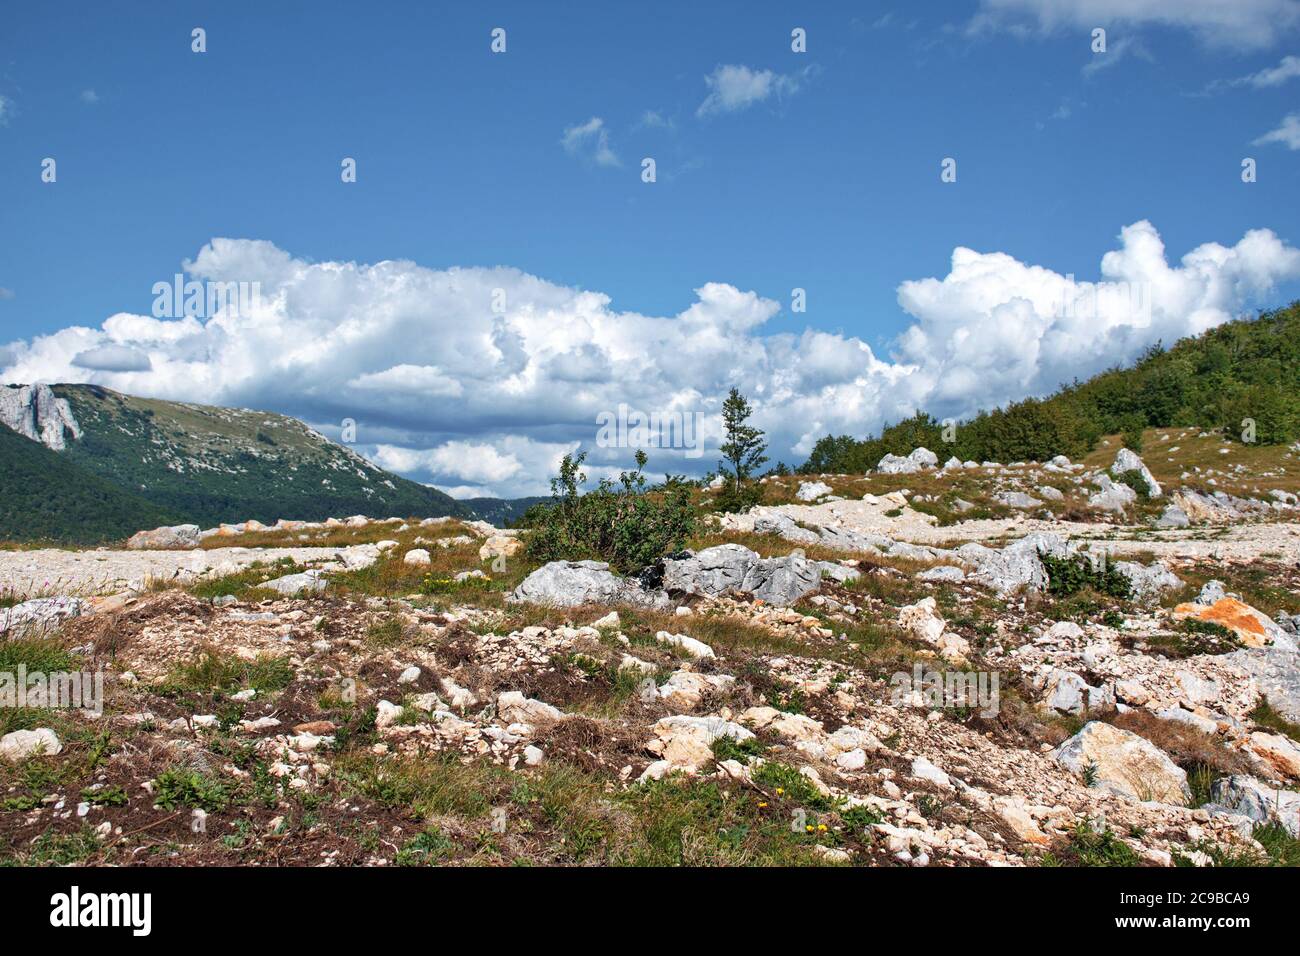 Rocky landscape of Velebit mountain ridge with sky and clouds in background, Croatia Stock Photo